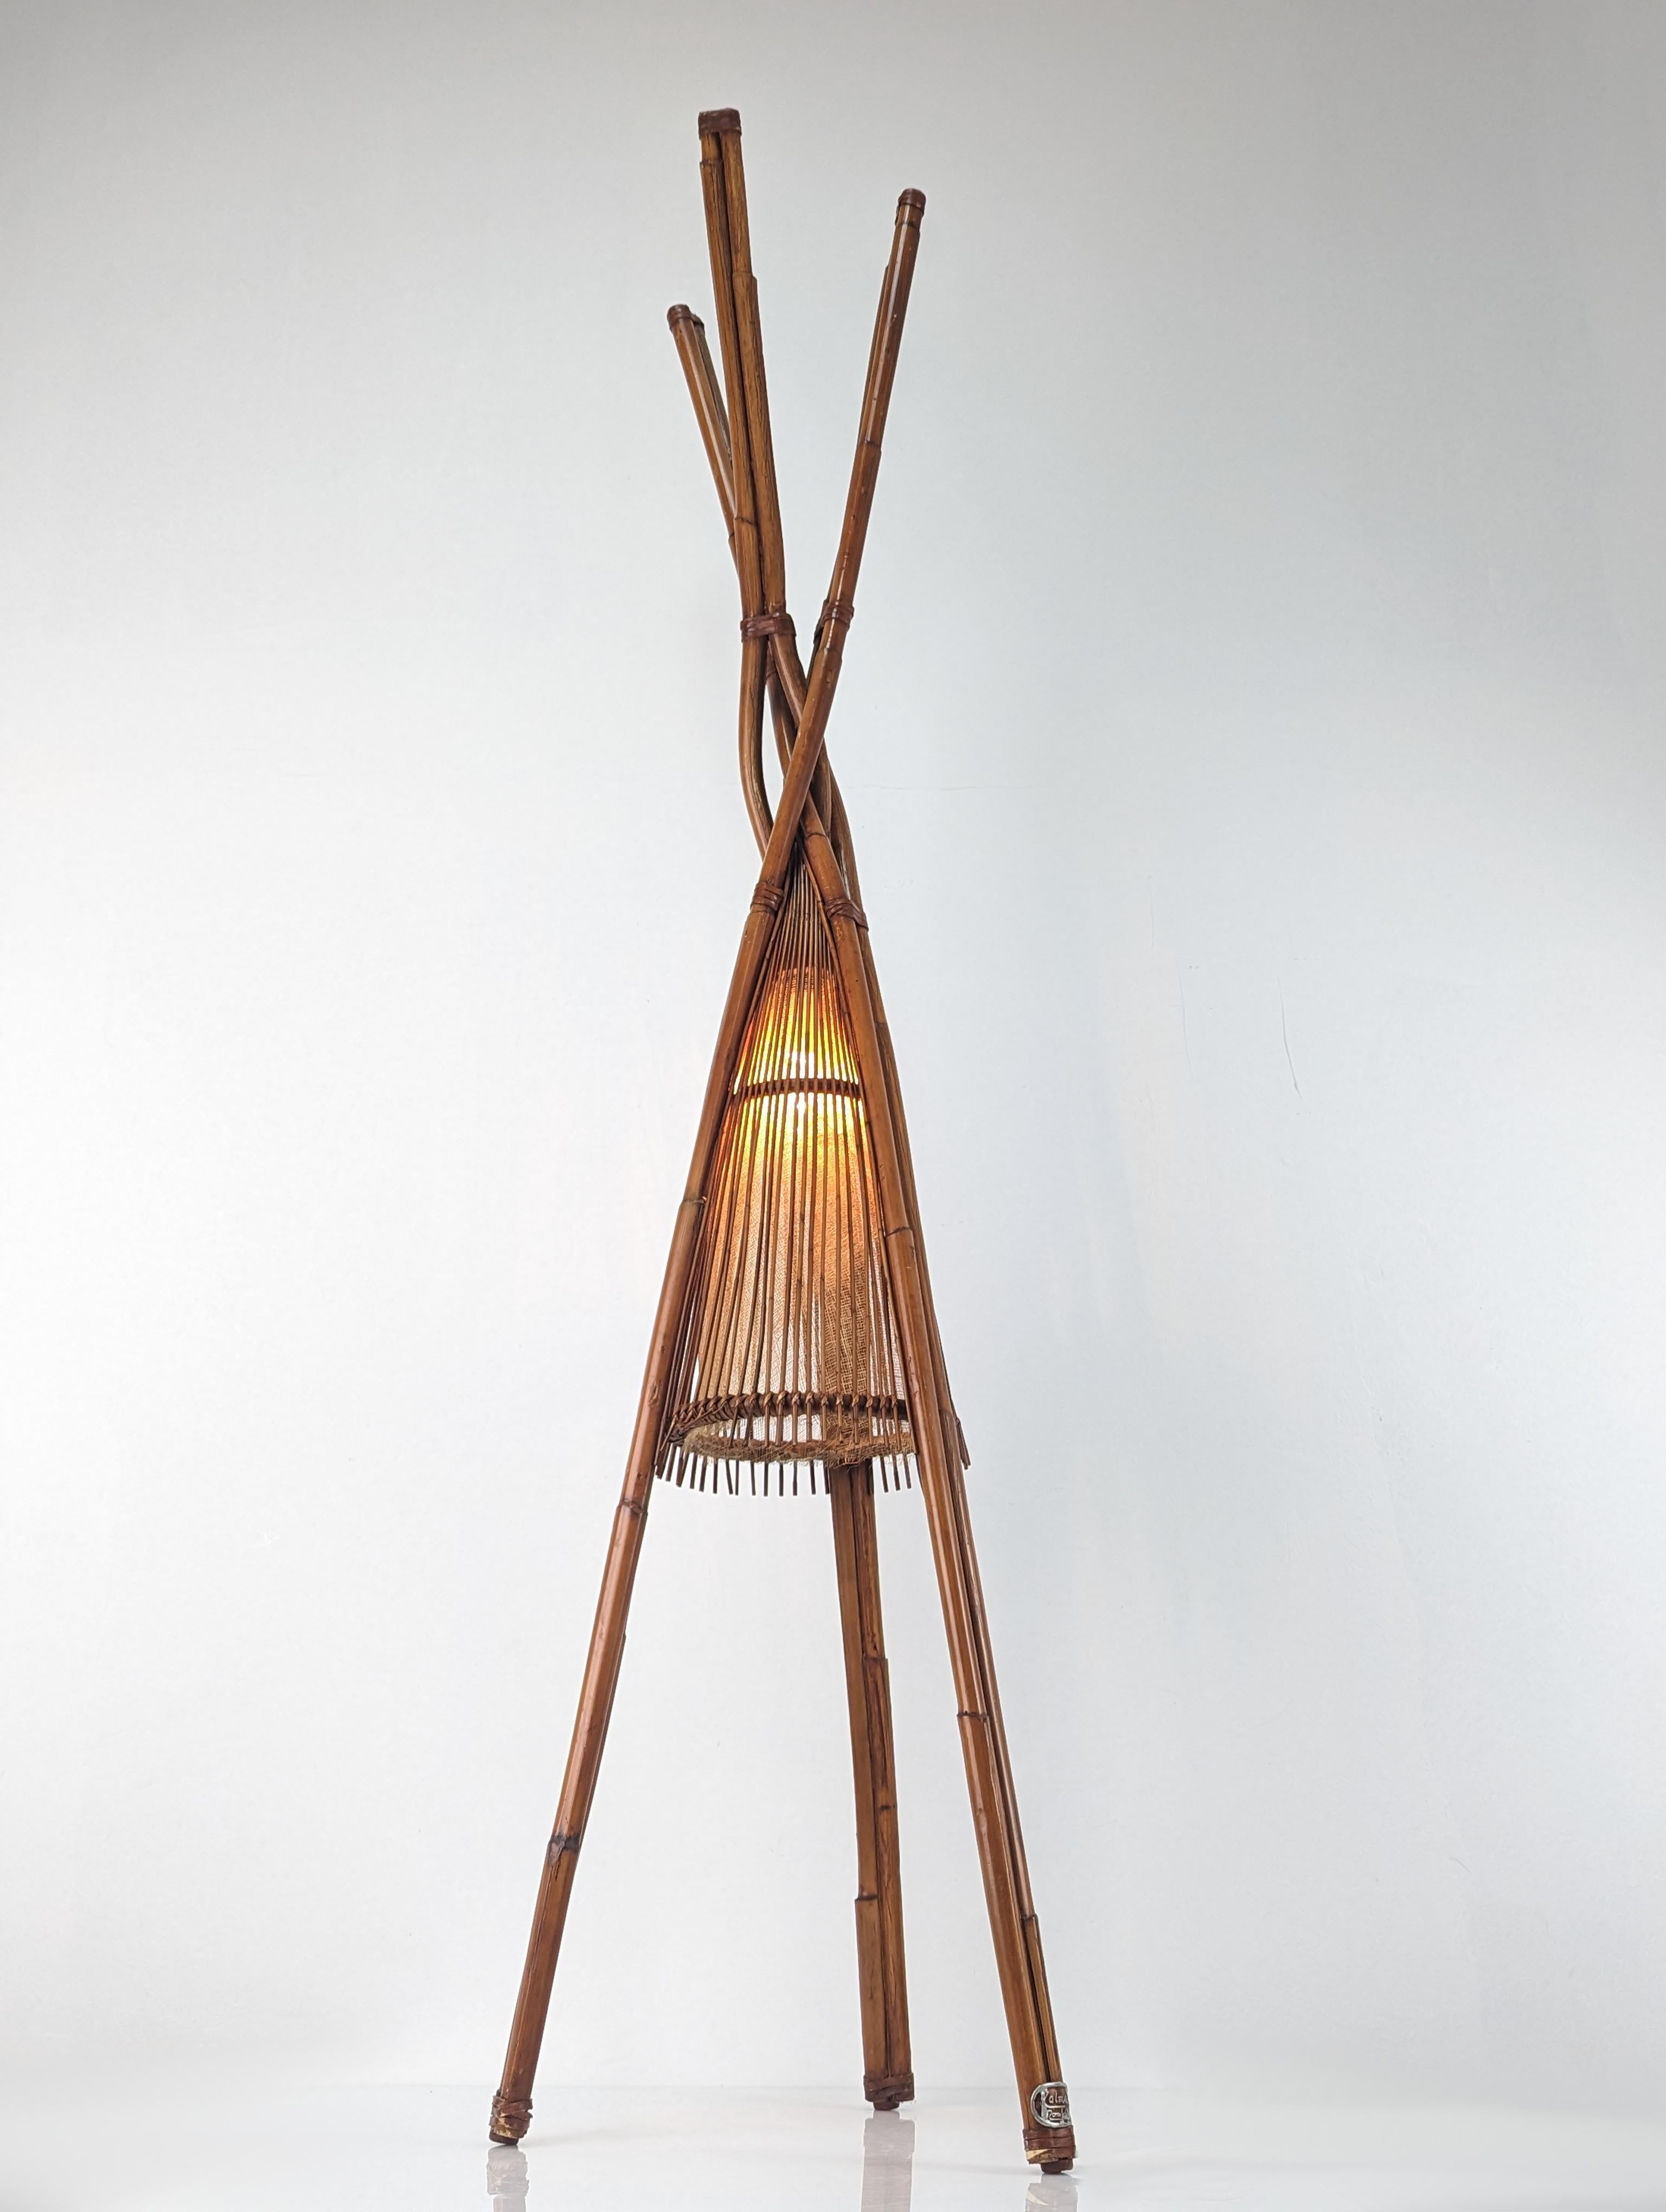 Fantastic Tipi-inspired lamp made of bamboo canes, super decorative and ideal for pleasant environments with floral decoration and natural materials. Nice light with dimmer.